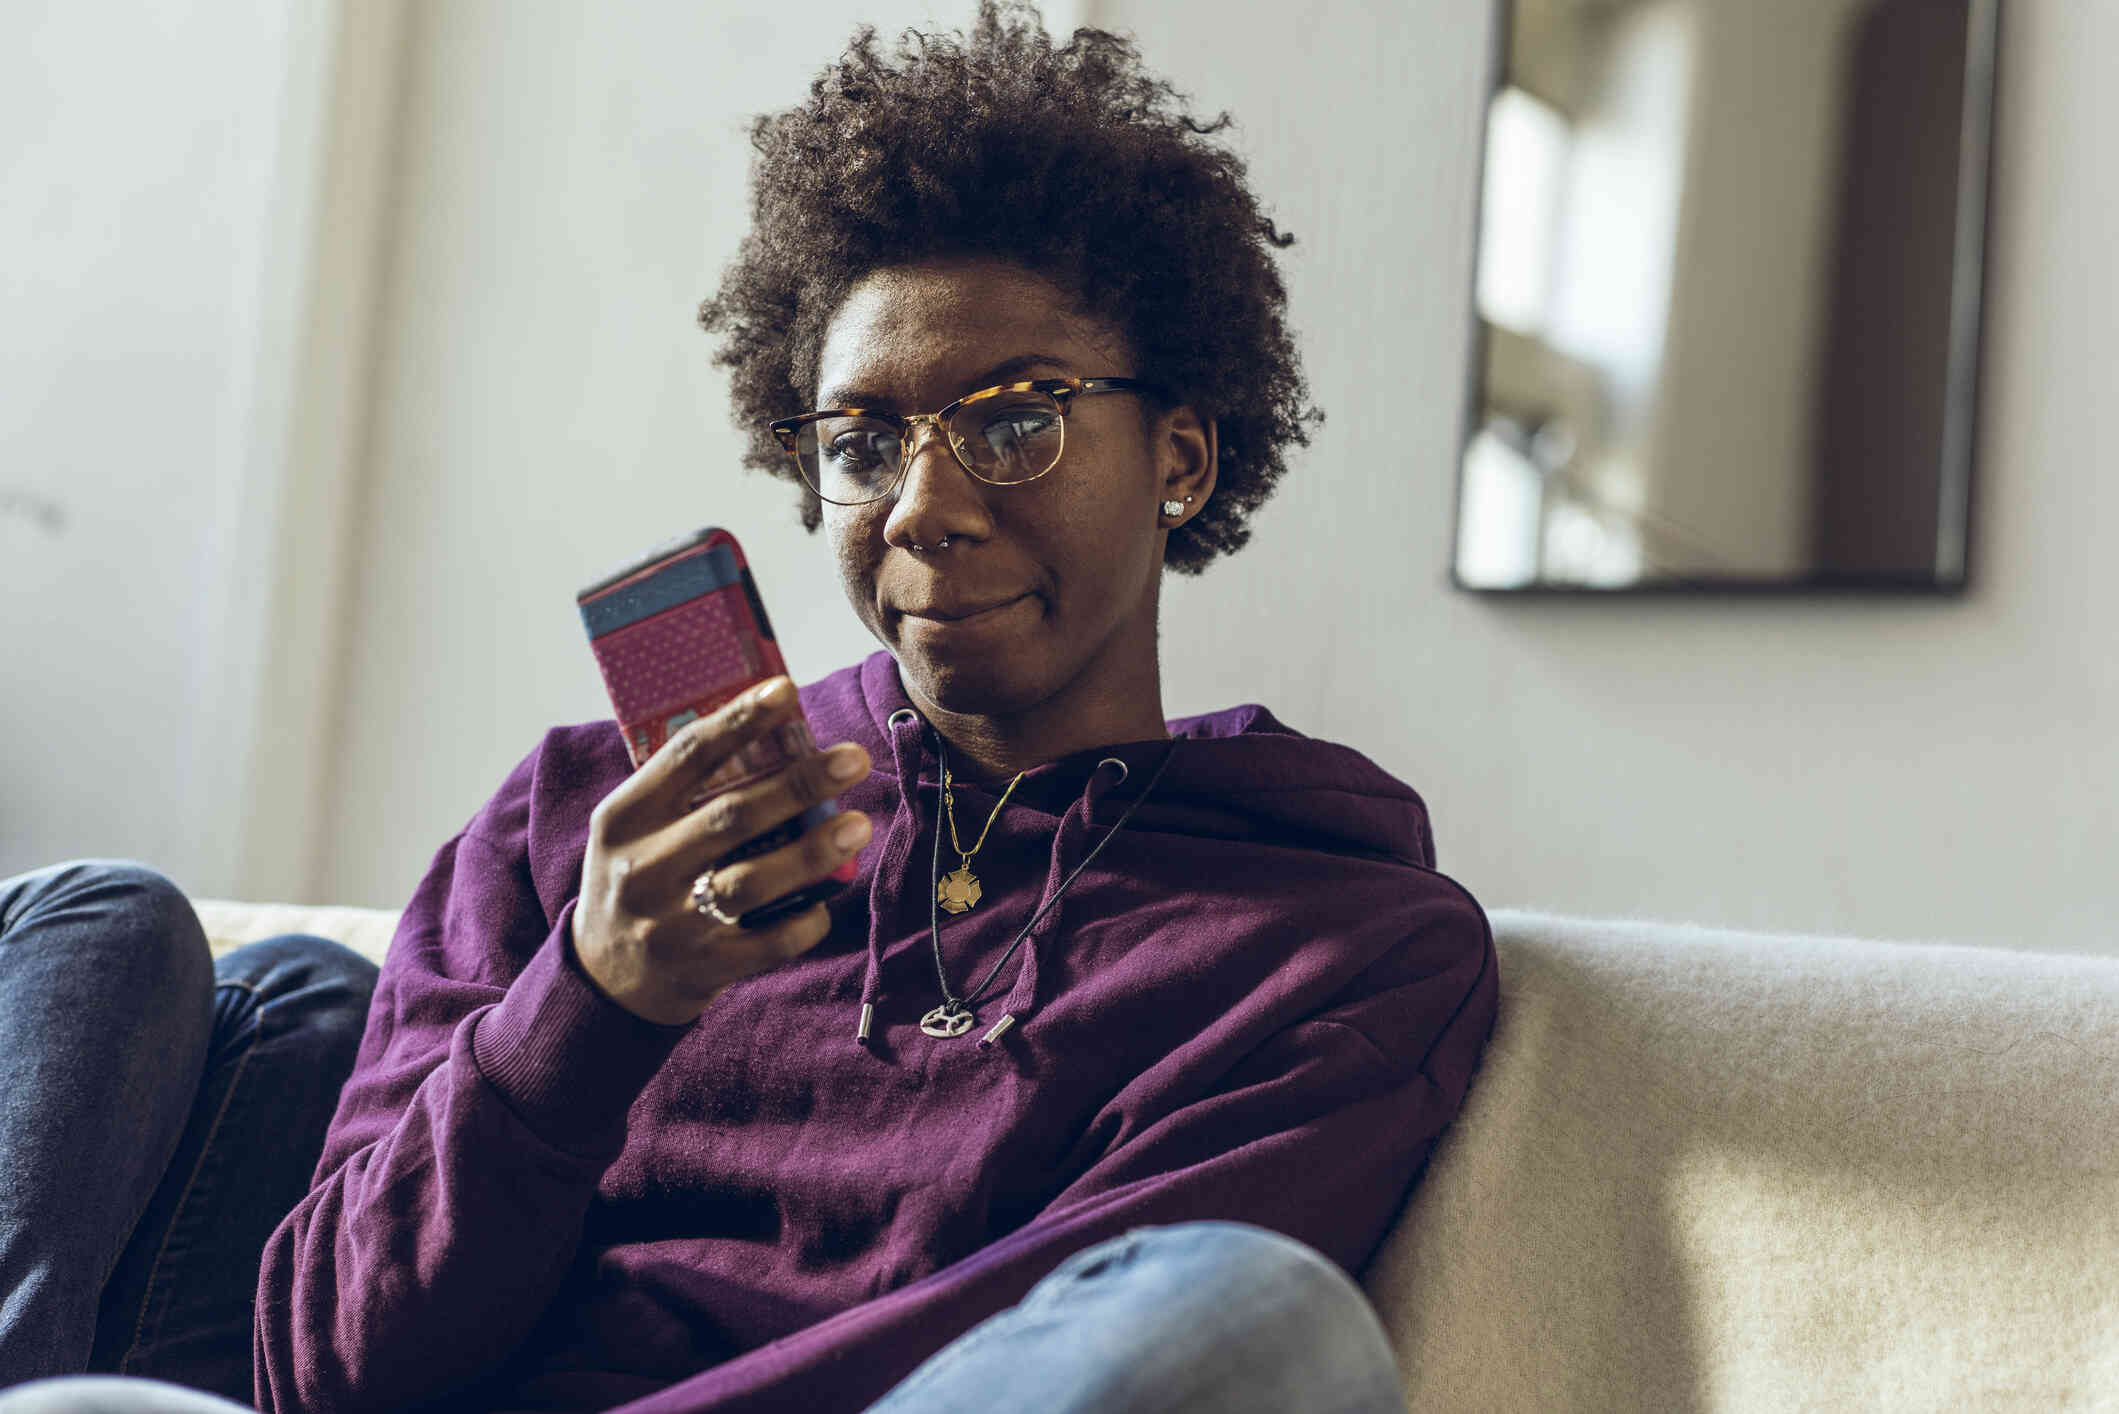 A woman in a purple hoodie sits on the couch and looks at the cellphone in her hand with  a curious expression.